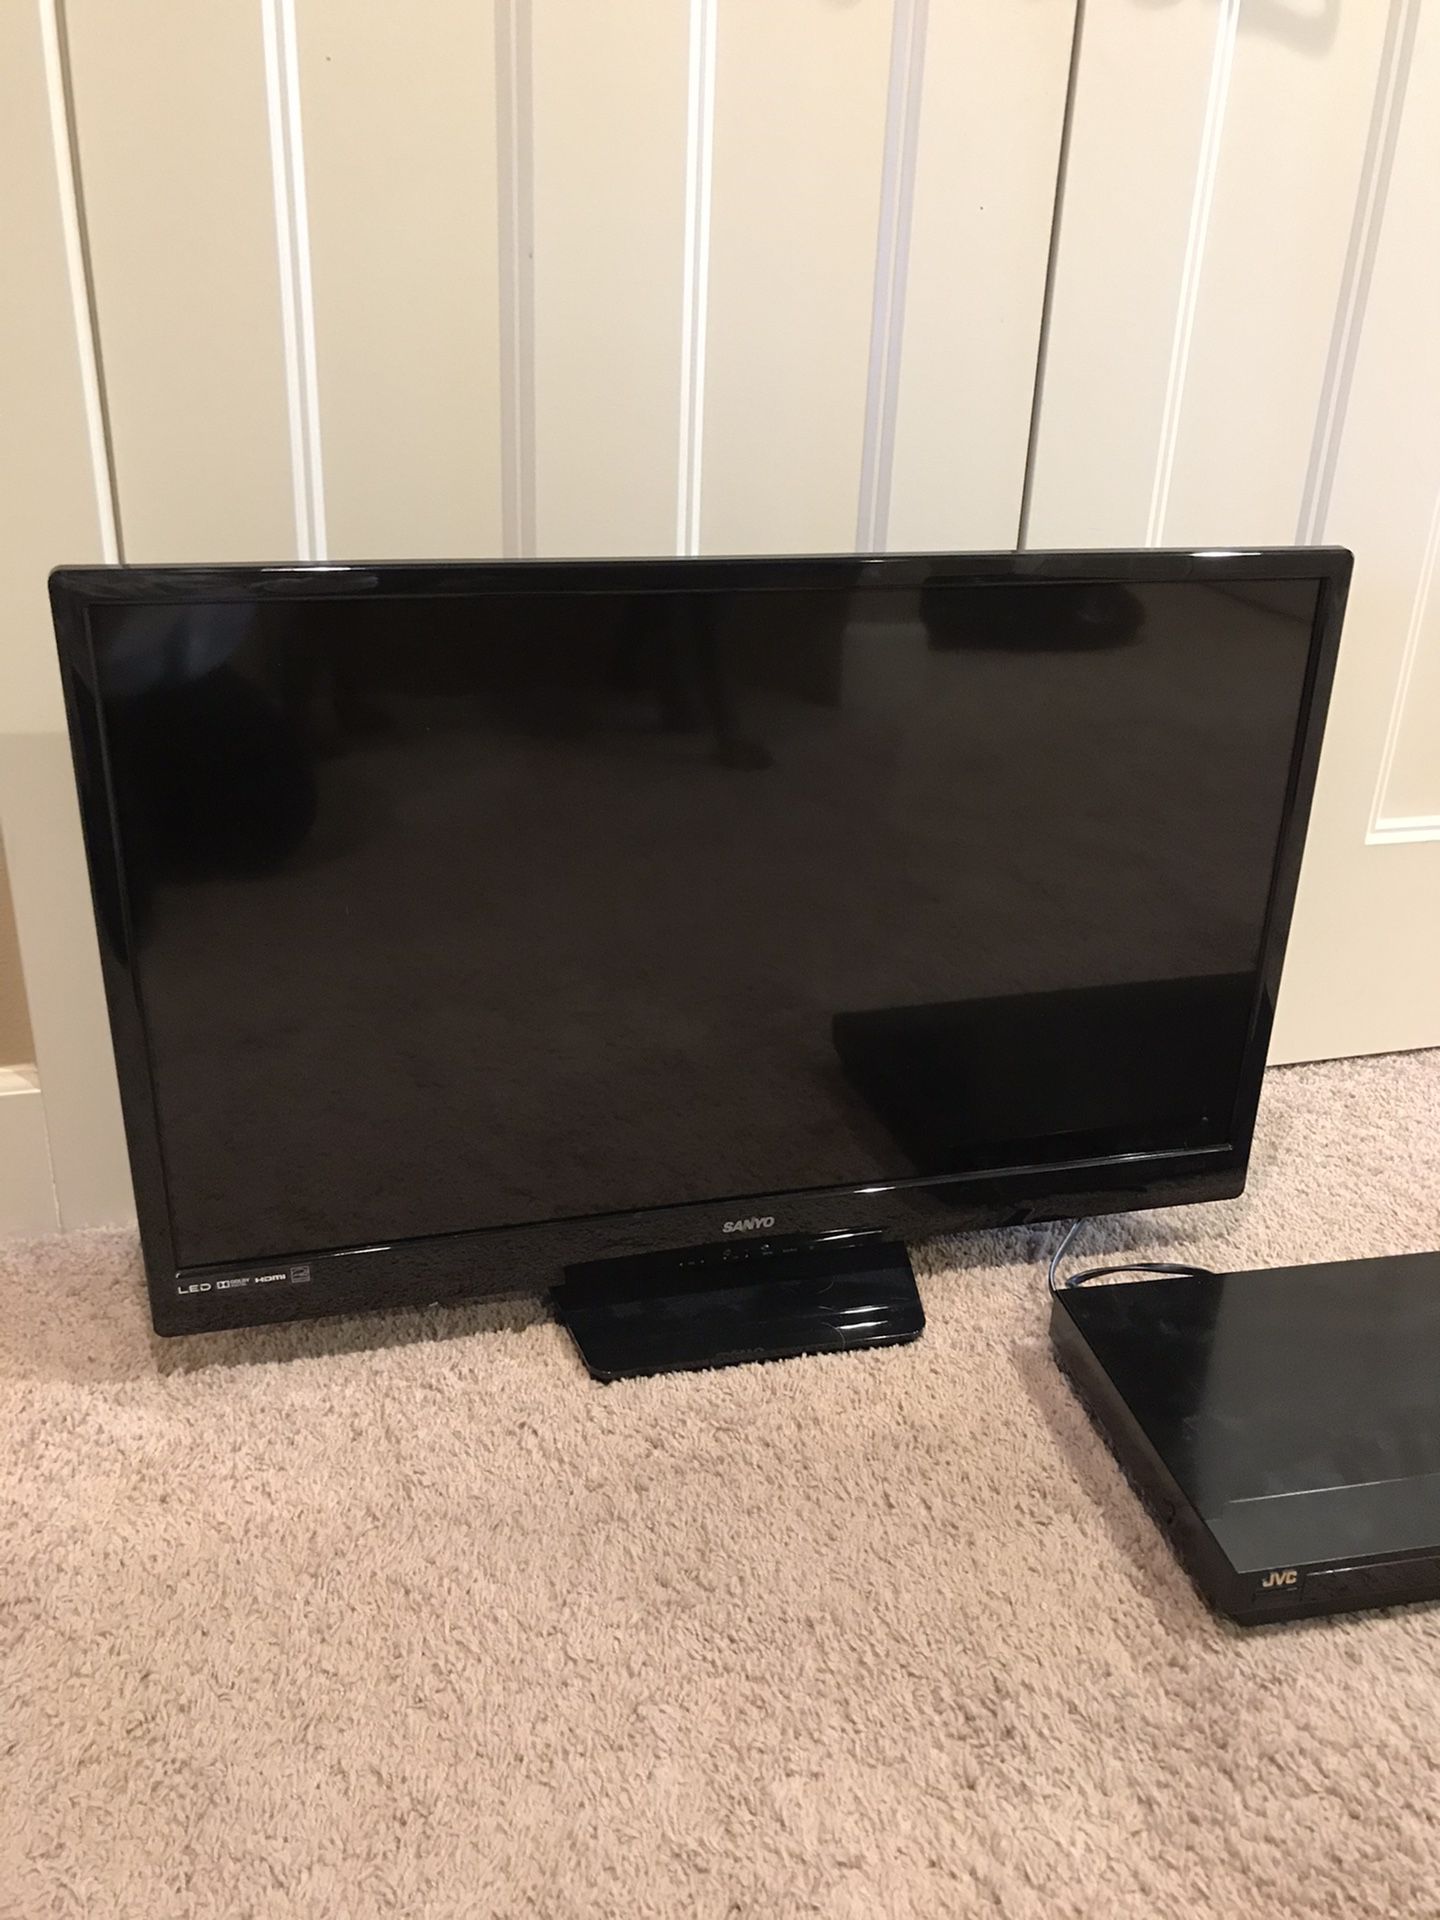 40” Sanyo tv and DVD player